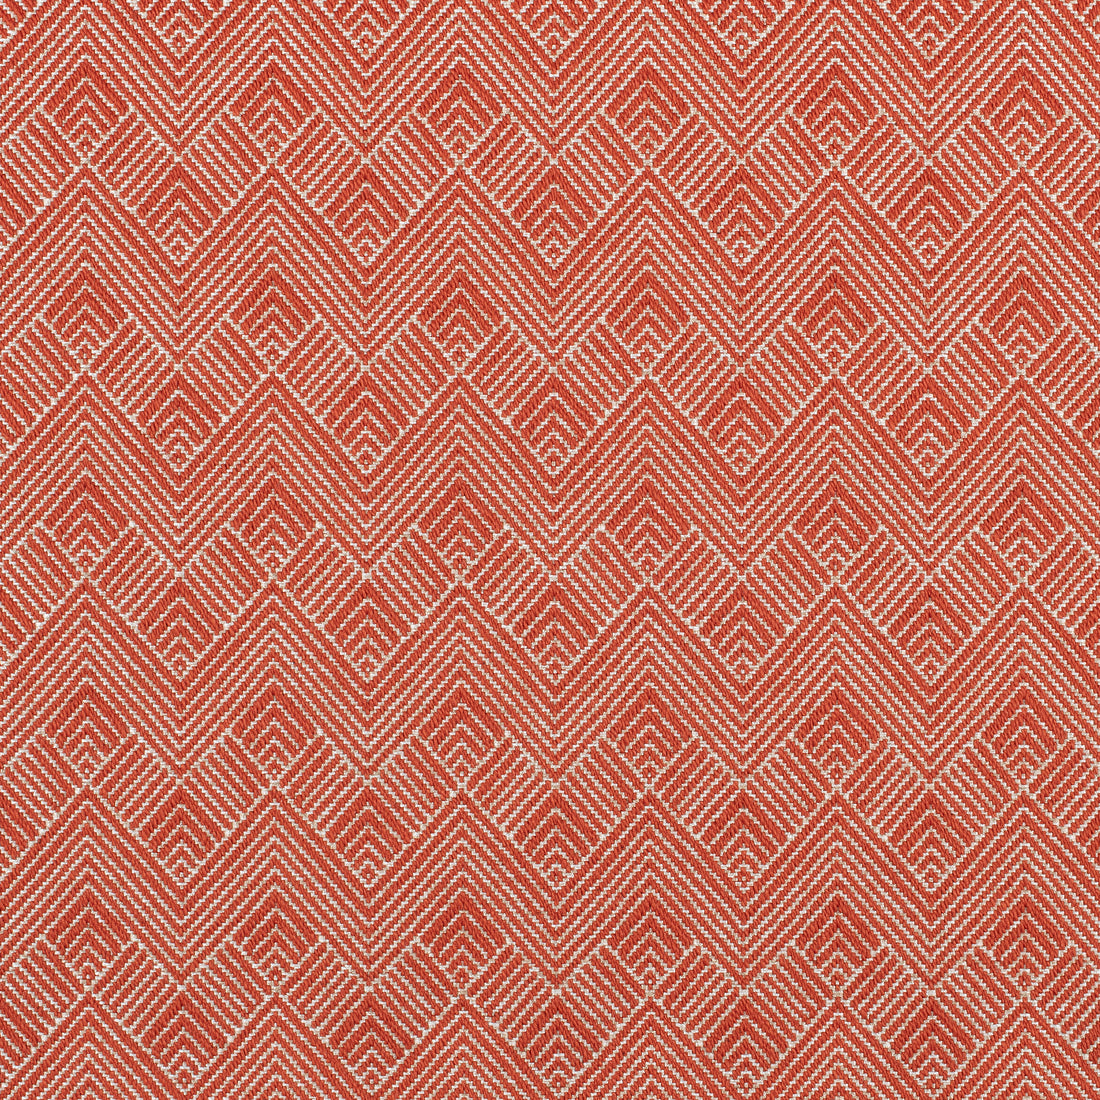 Maddox fabric in burnt orange color - pattern number W73327 - by Thibaut in the Nomad collection